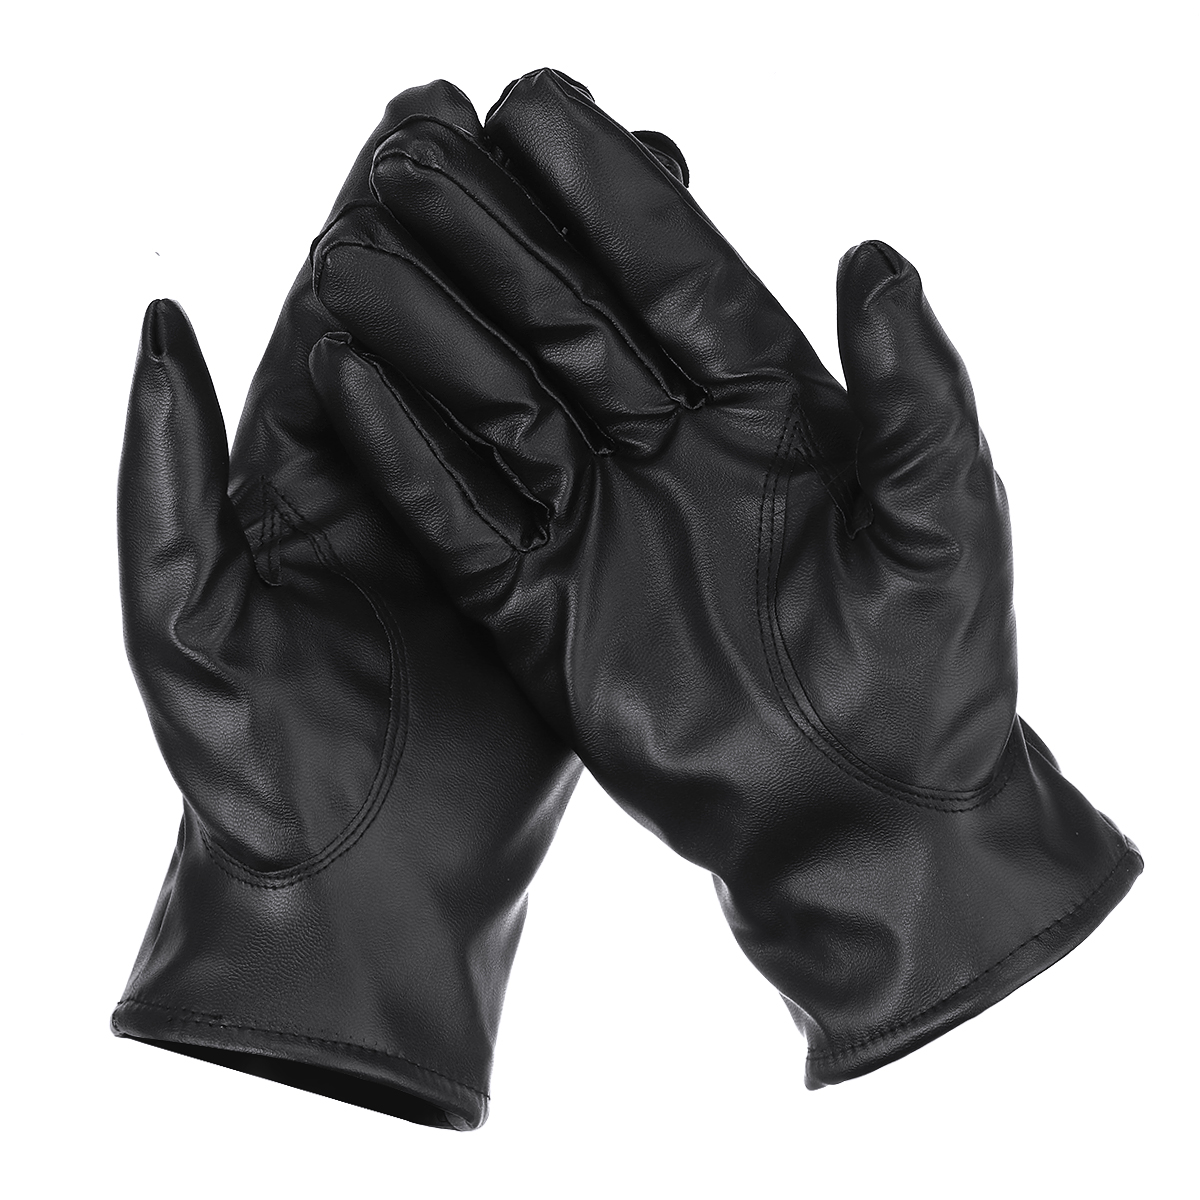 

Thermal Leather Gloves Men Winter Warm Touch Screen Driving Gloves Black